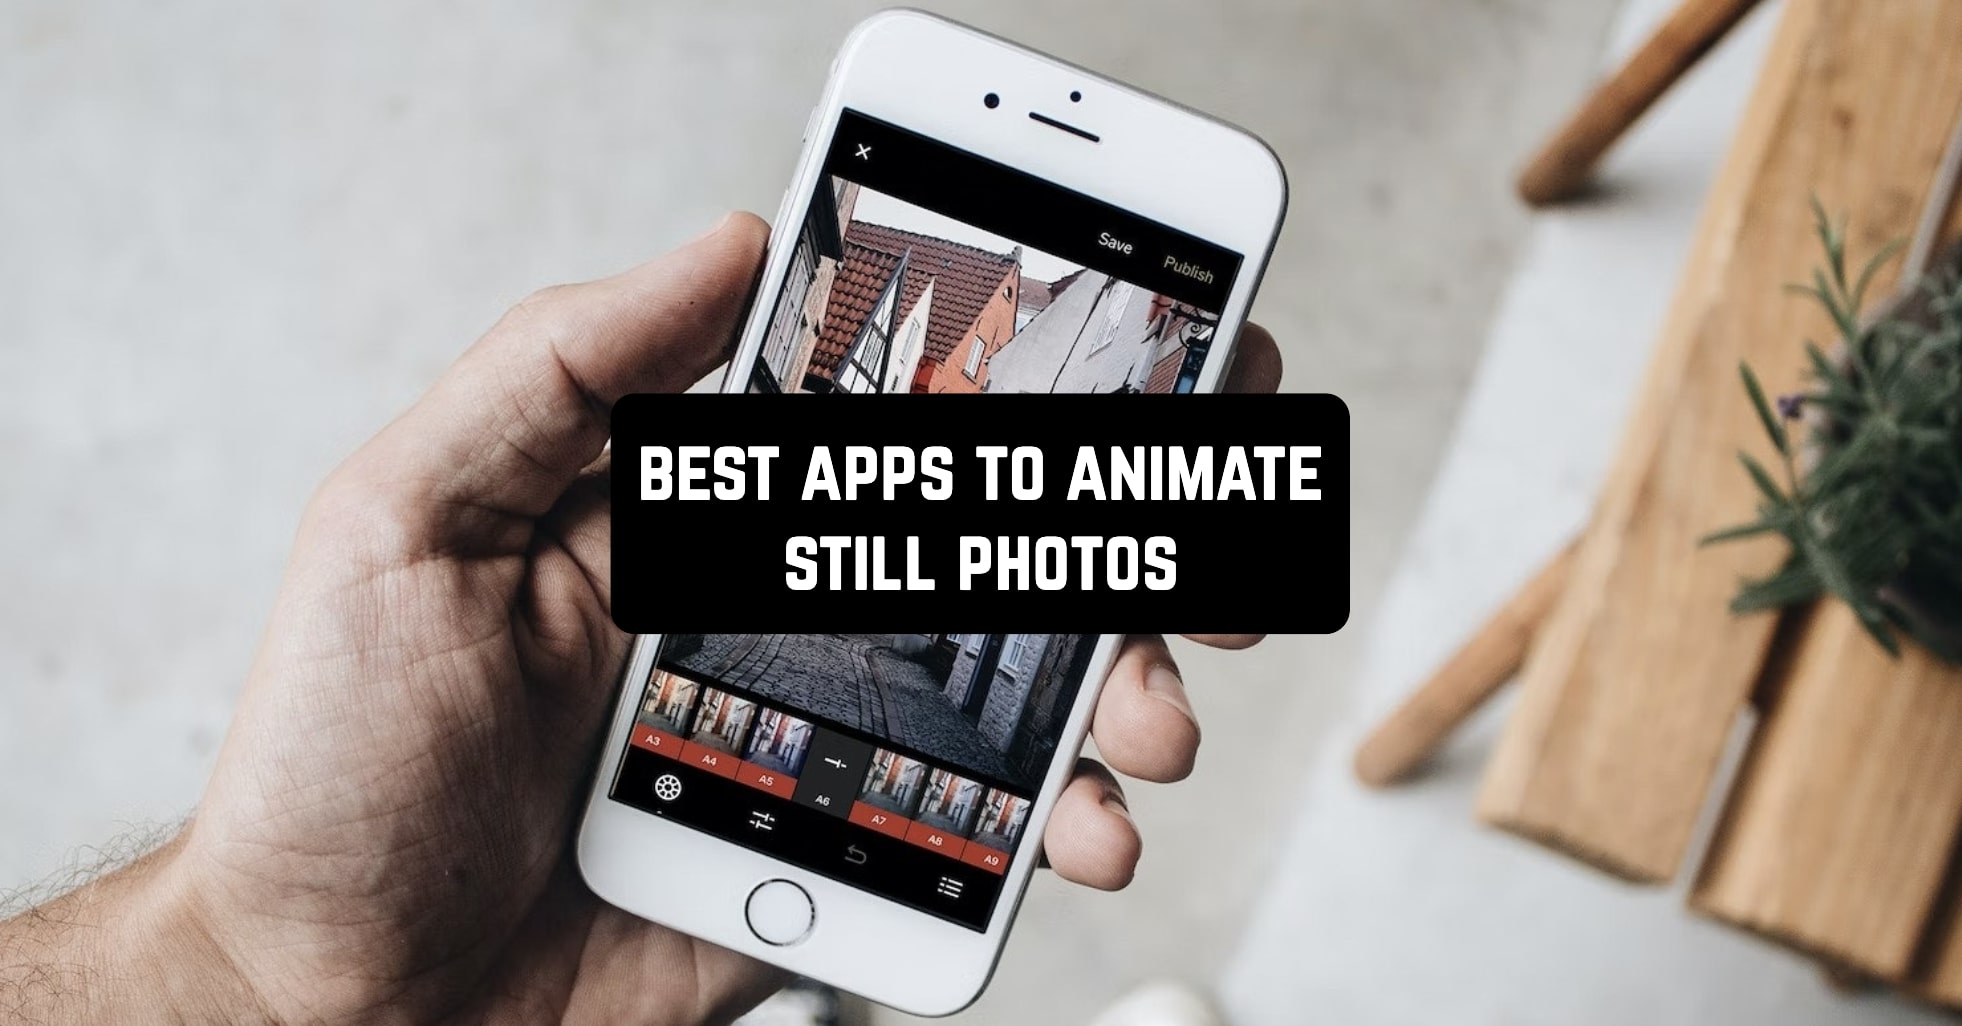 Animateme Animatemeapp Sticker - Animateme Animatemeapp Funny Memes -  Discover & Share GIFs